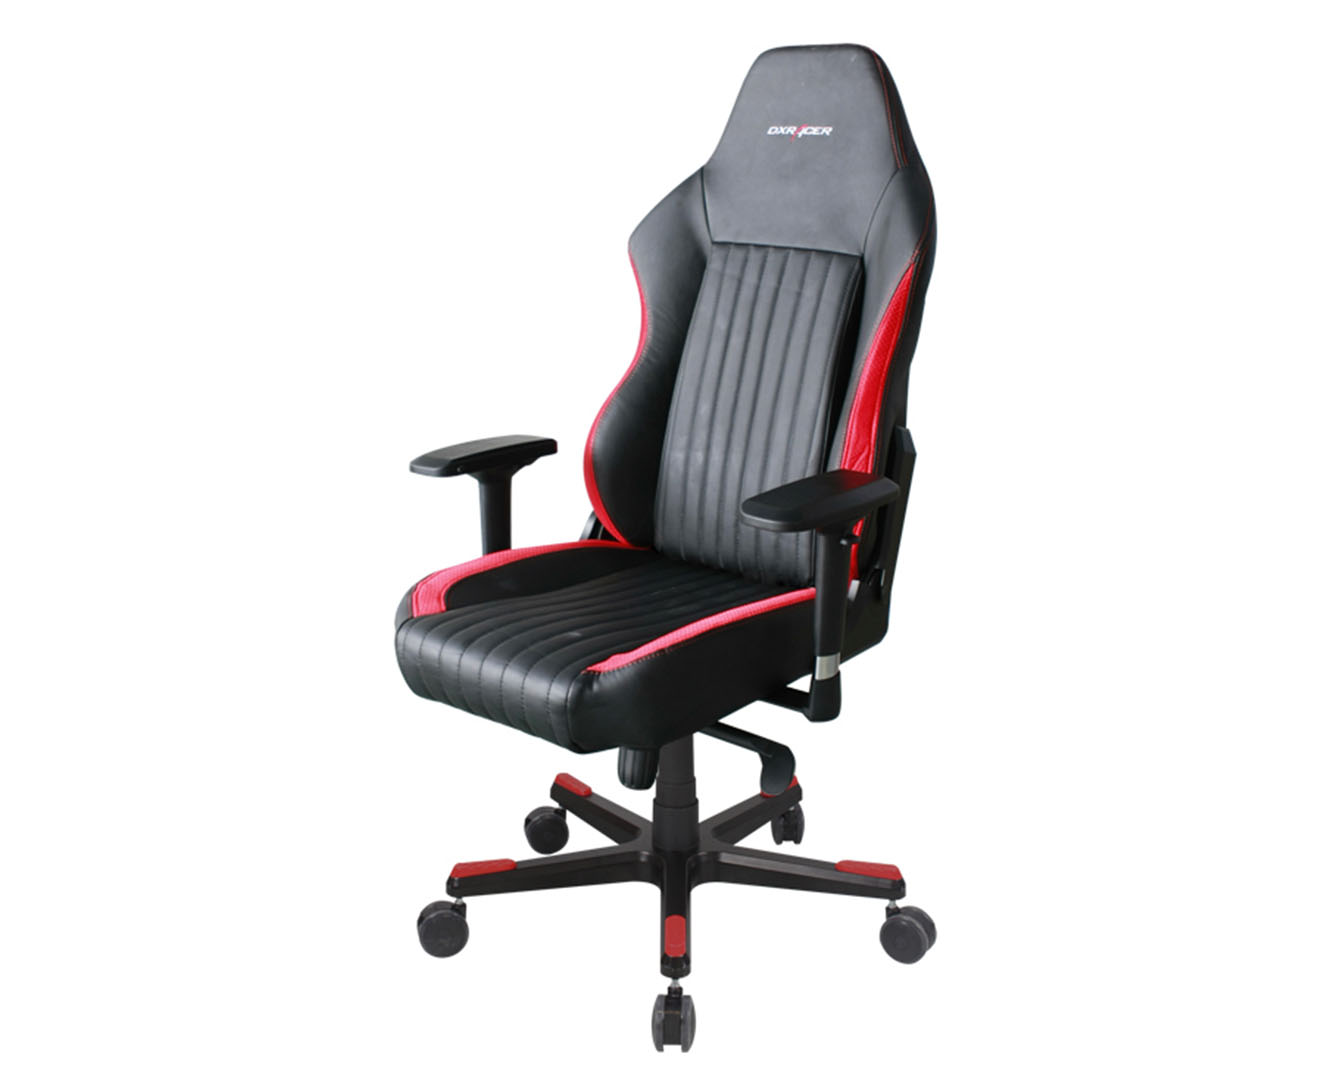  DXRacer Max  Series Executive Office Chair Black Red 